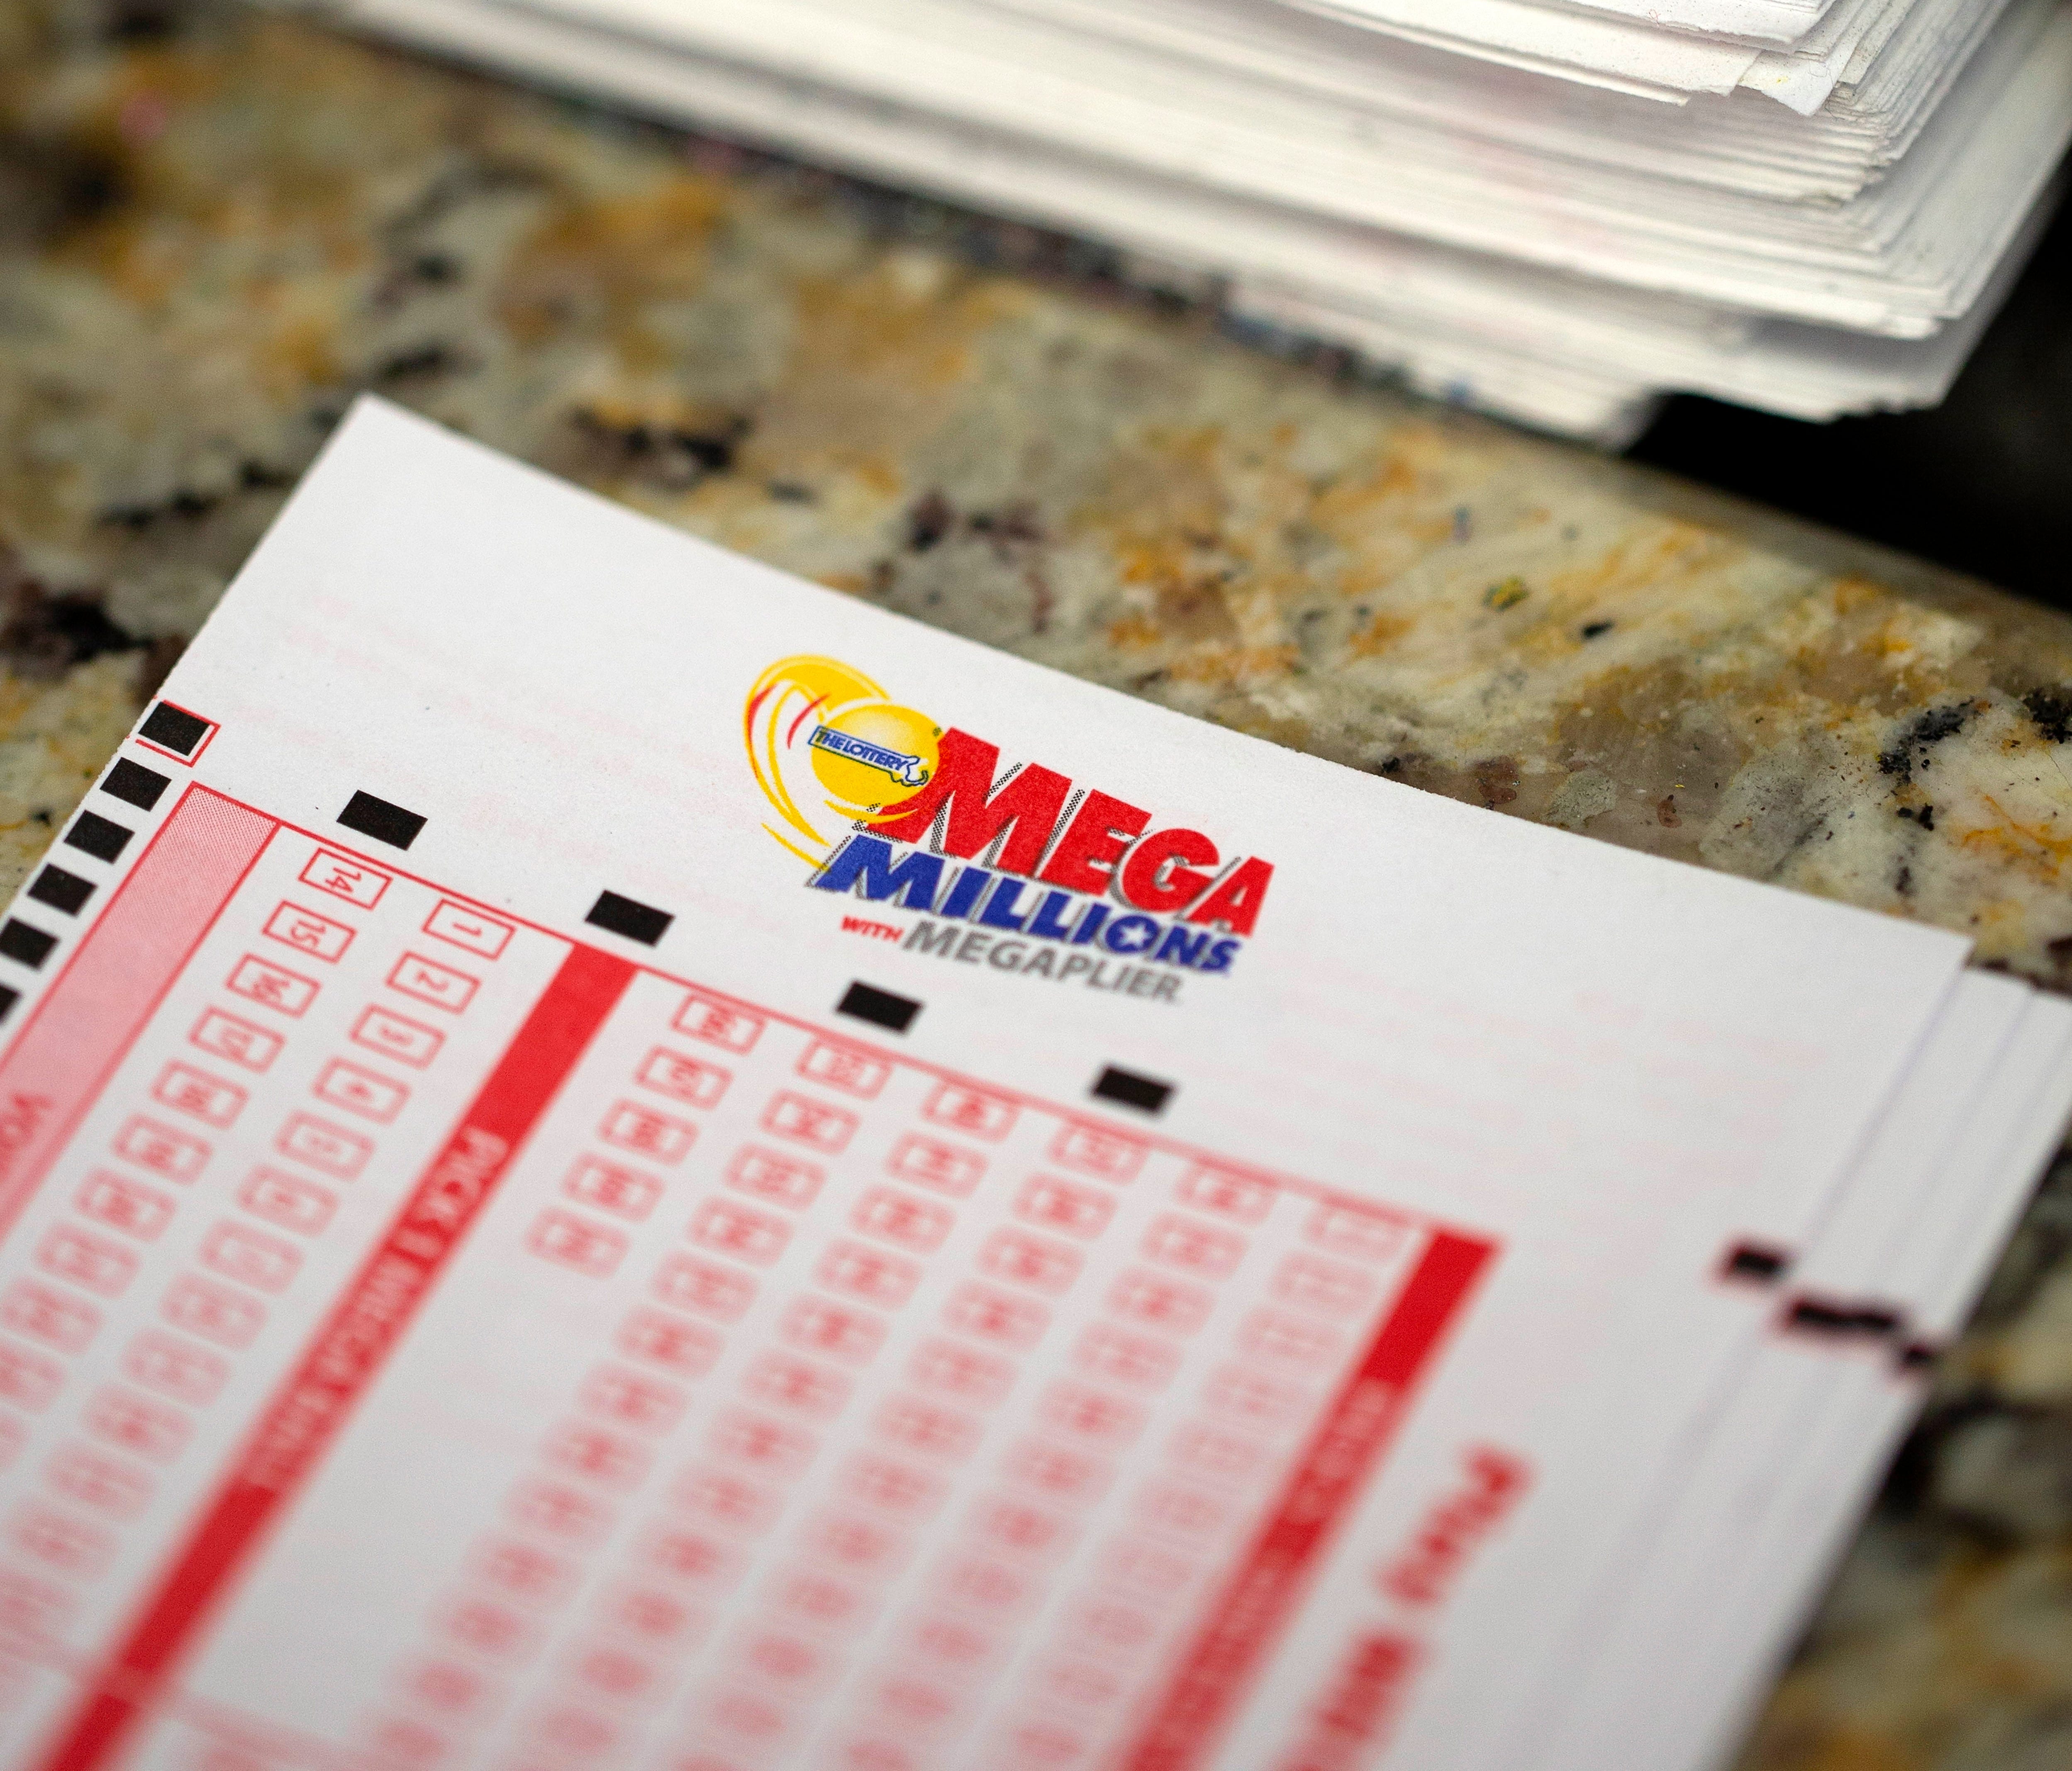 A winning Mega Millions Lottery ticket was sold in California, officials say.